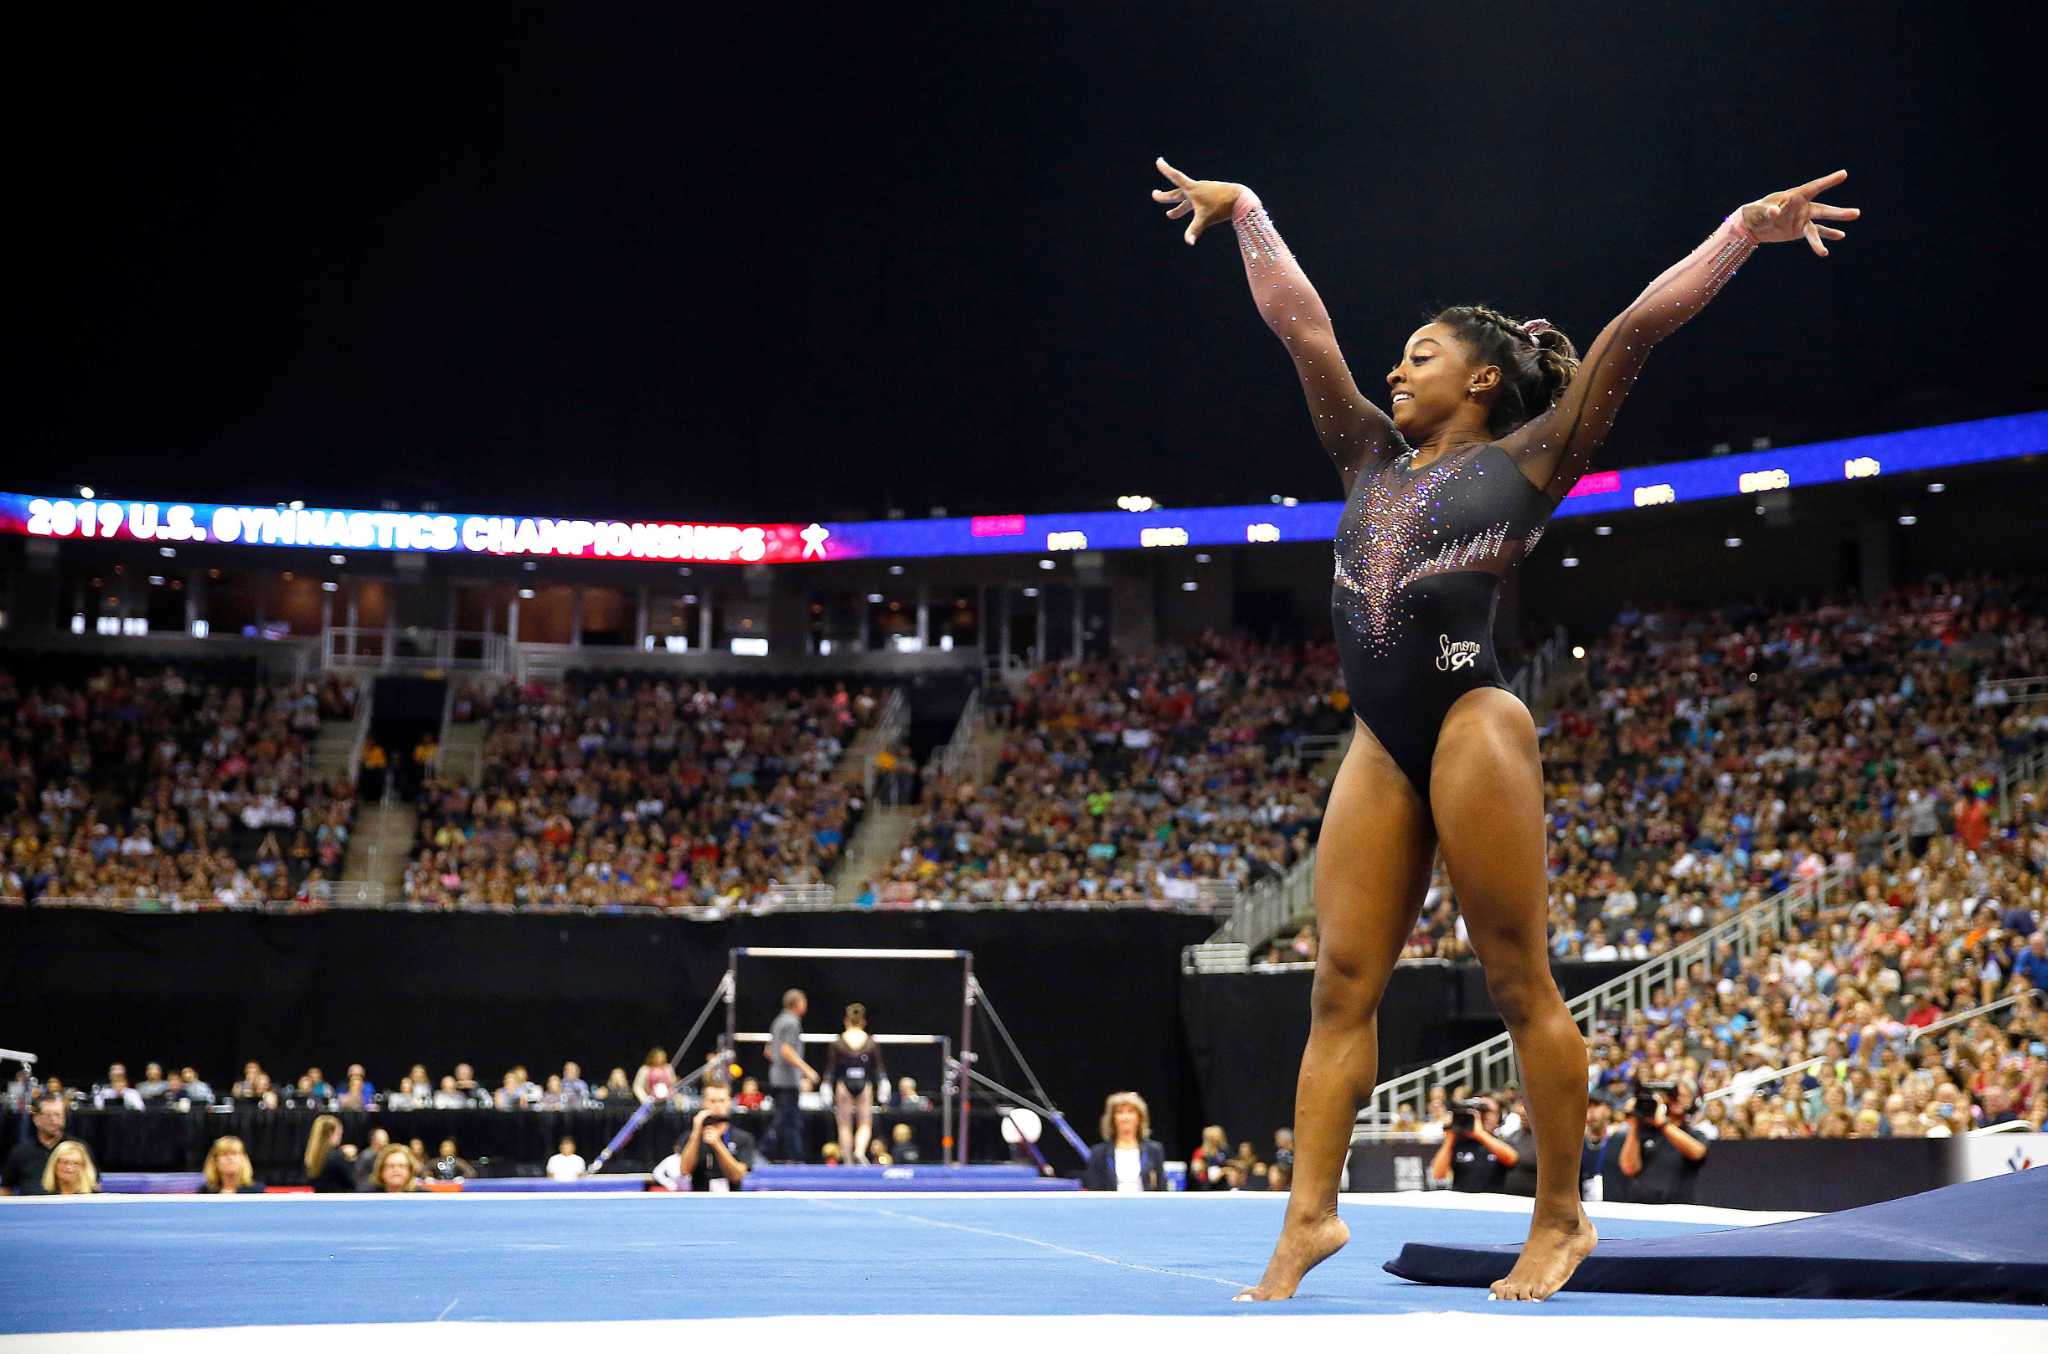 Simone Biles makes history with 'hardest move in the world' at U.S